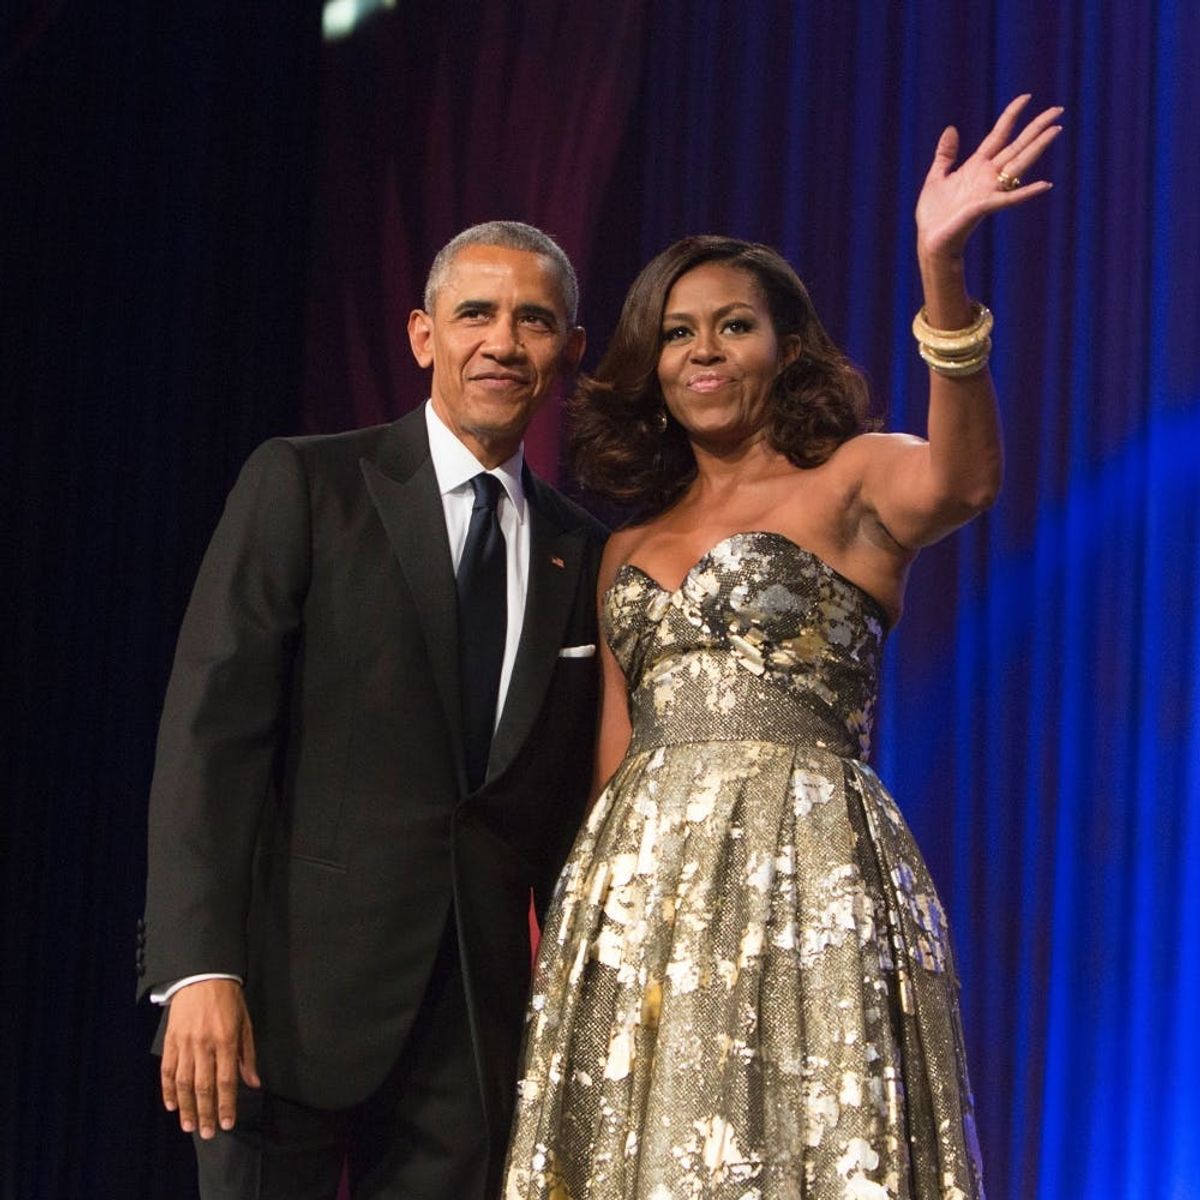 The Obamas’ Valentine’s Day Messages to Each Other Are Total #RelationshipGoals